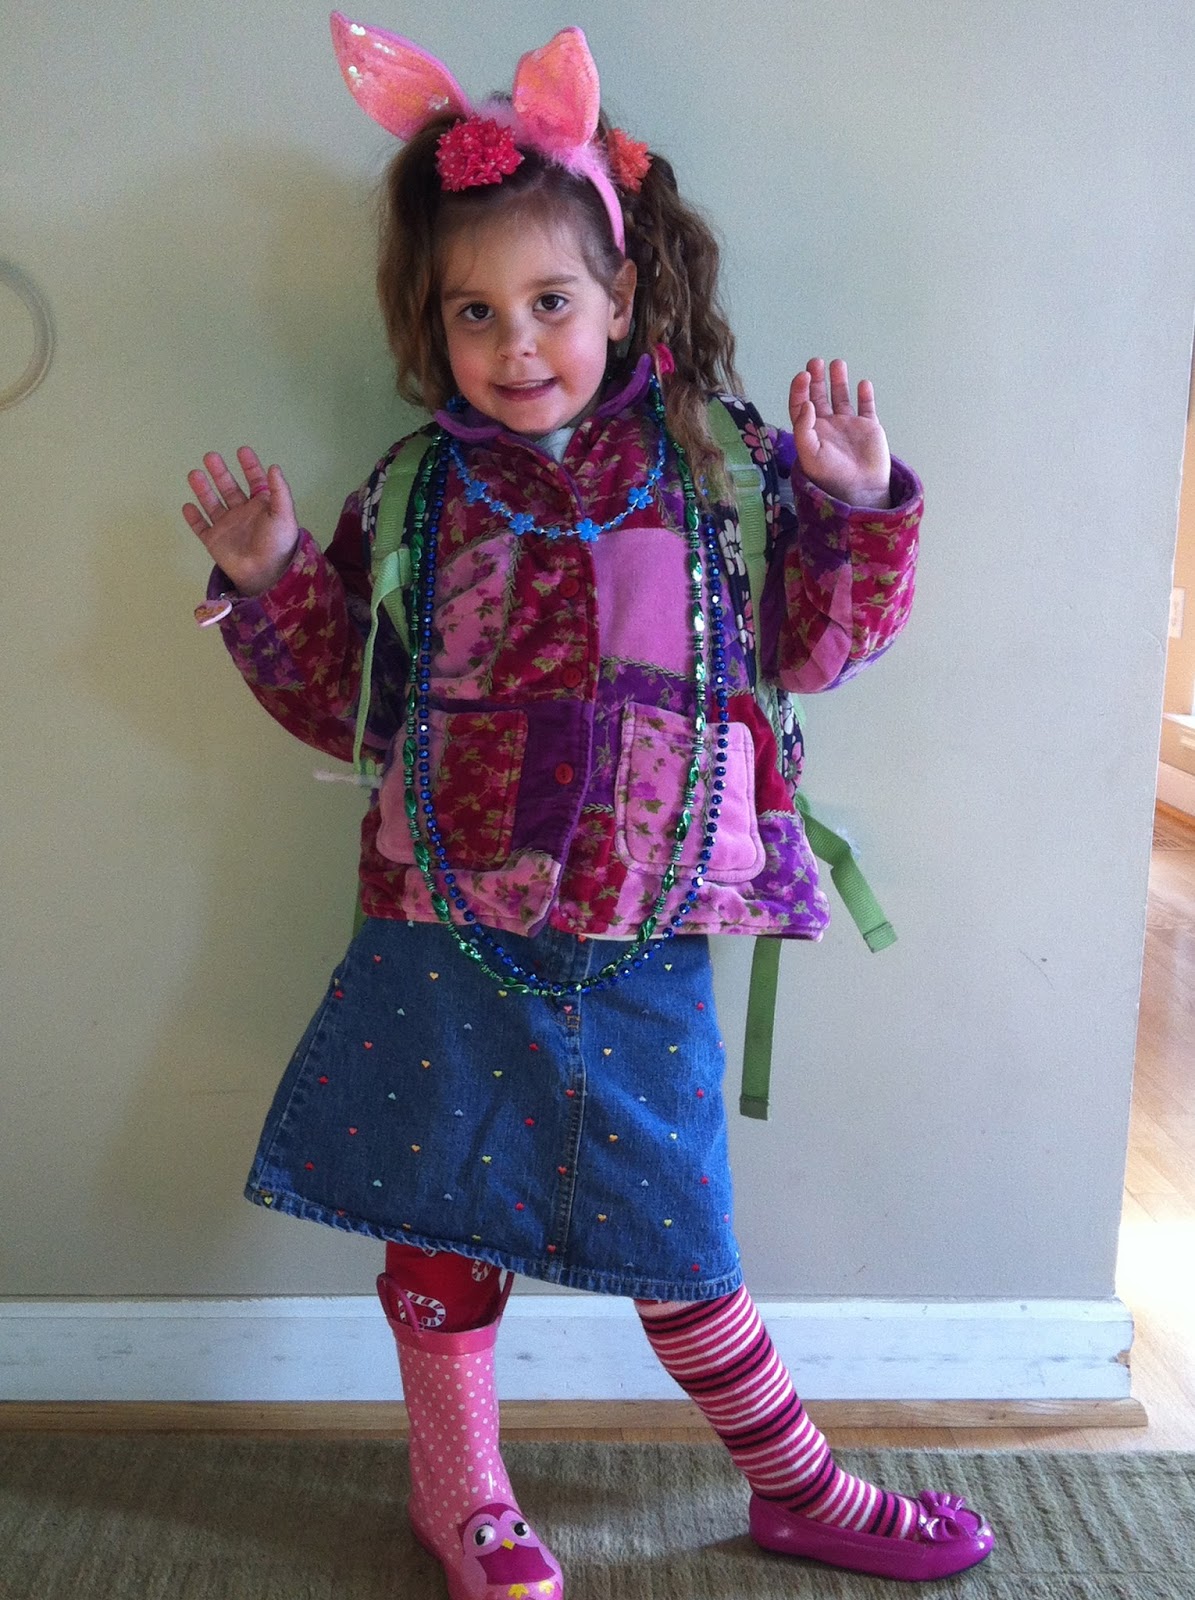 THESE ARE THE DAYS OF YOUR LIVES......: Mismatched day at Preschool!